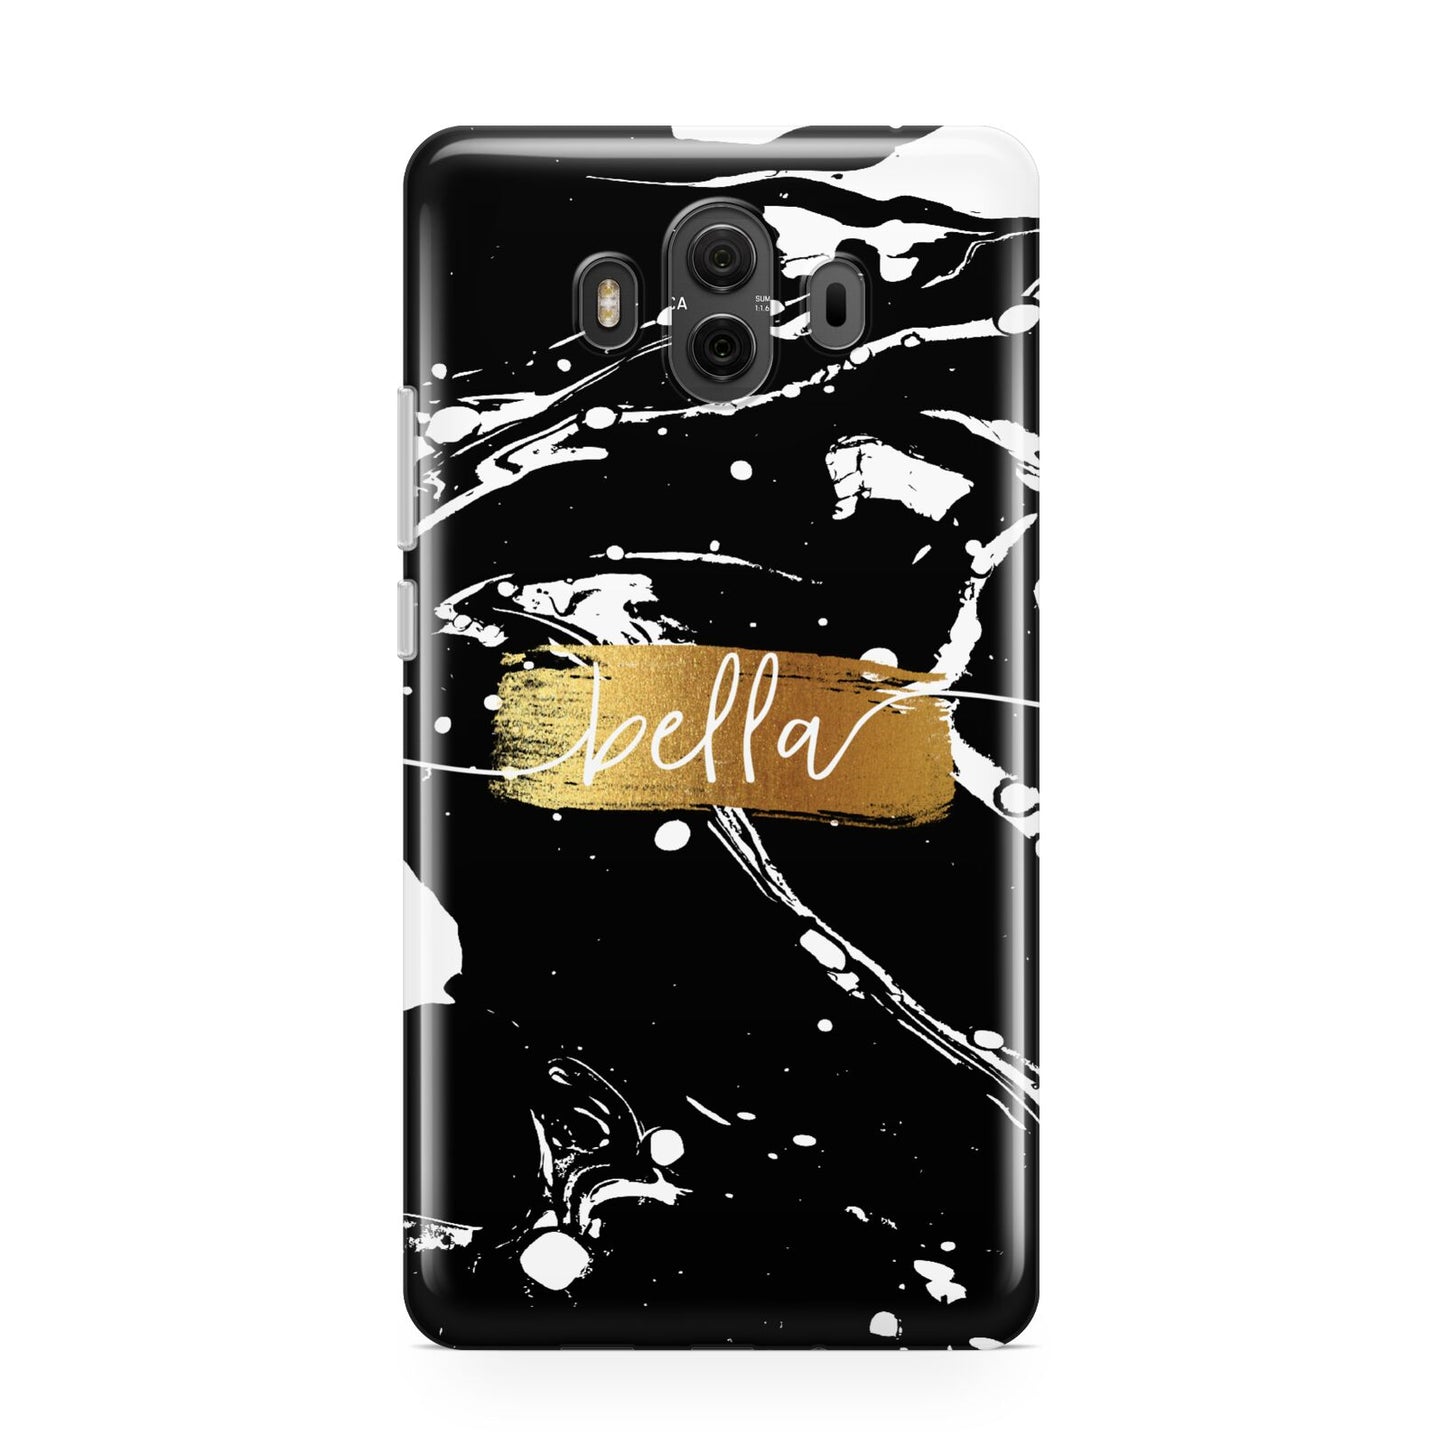 Personalised Black Gold Swirl Marble Huawei Mate 10 Protective Phone Case